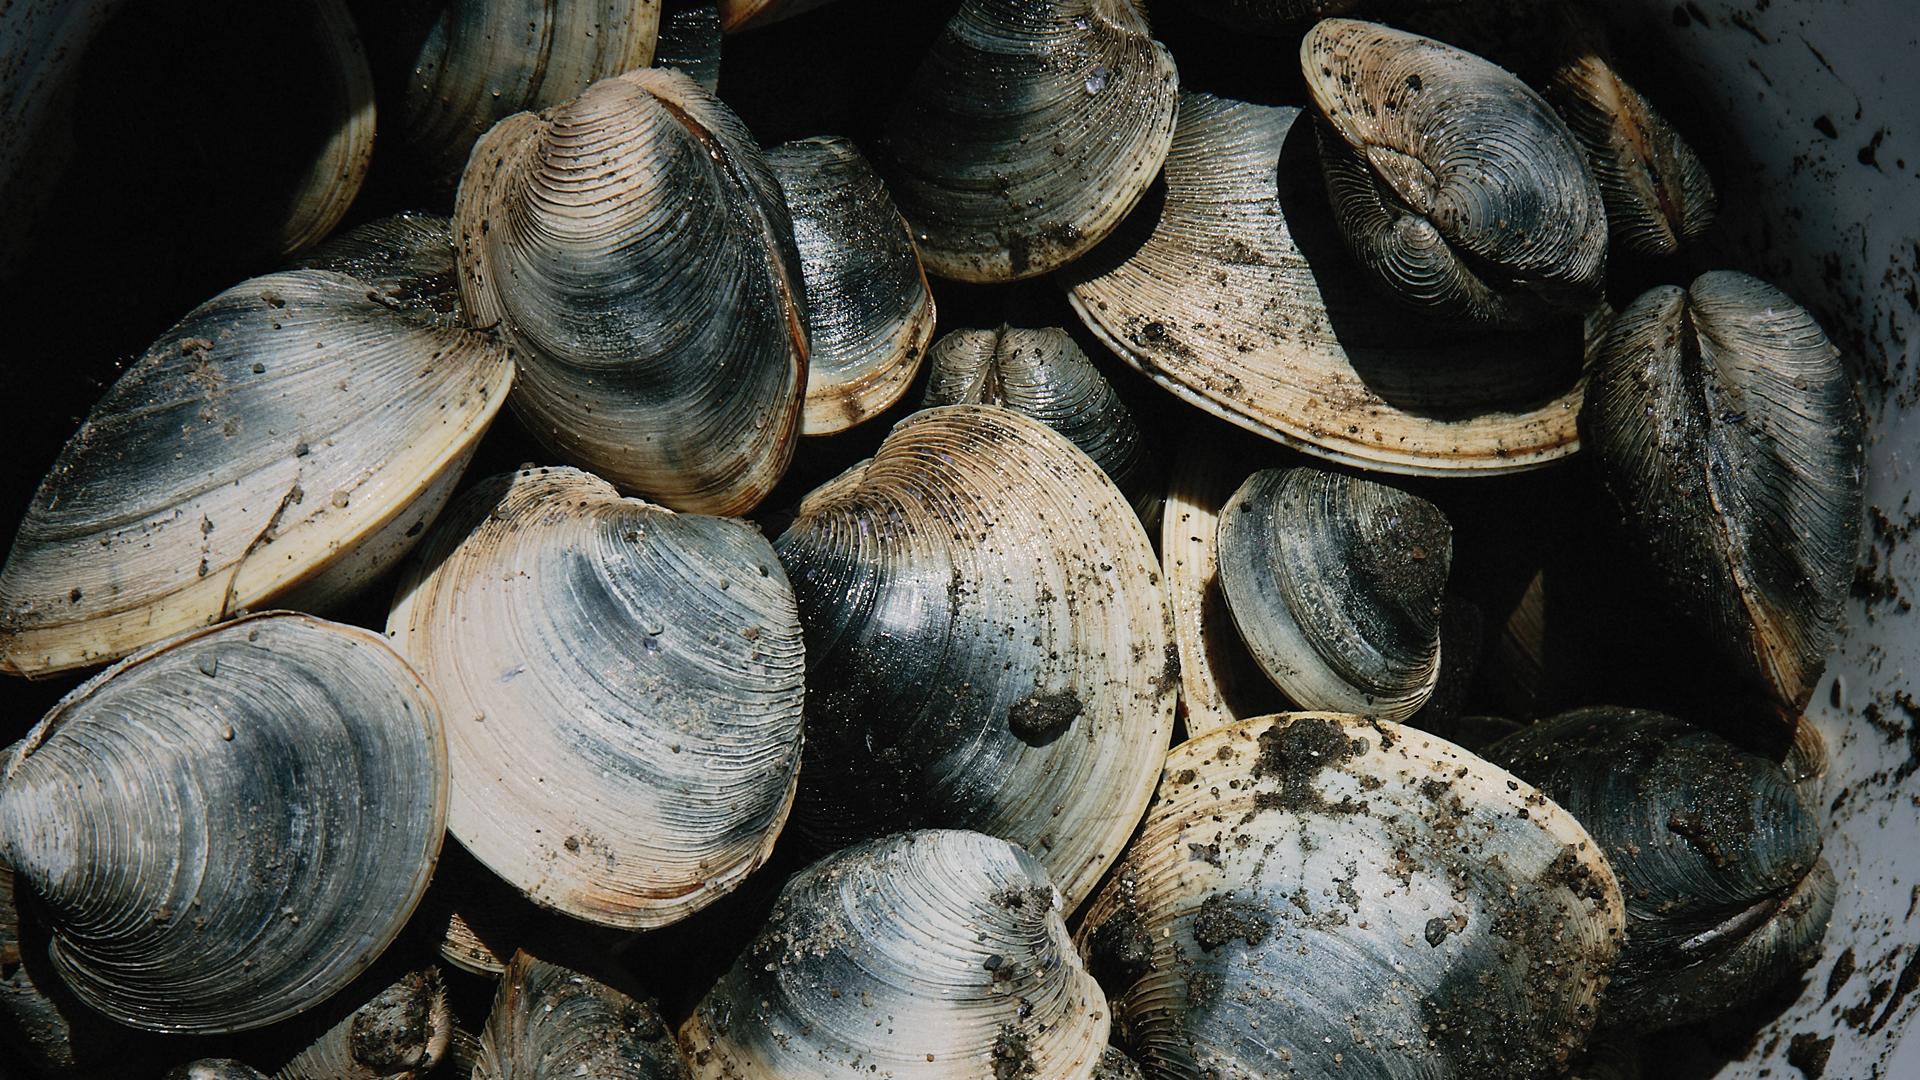 A Rising Tide, cookbook and stories from Canada's Atlantic Coast | Freshly caught clams